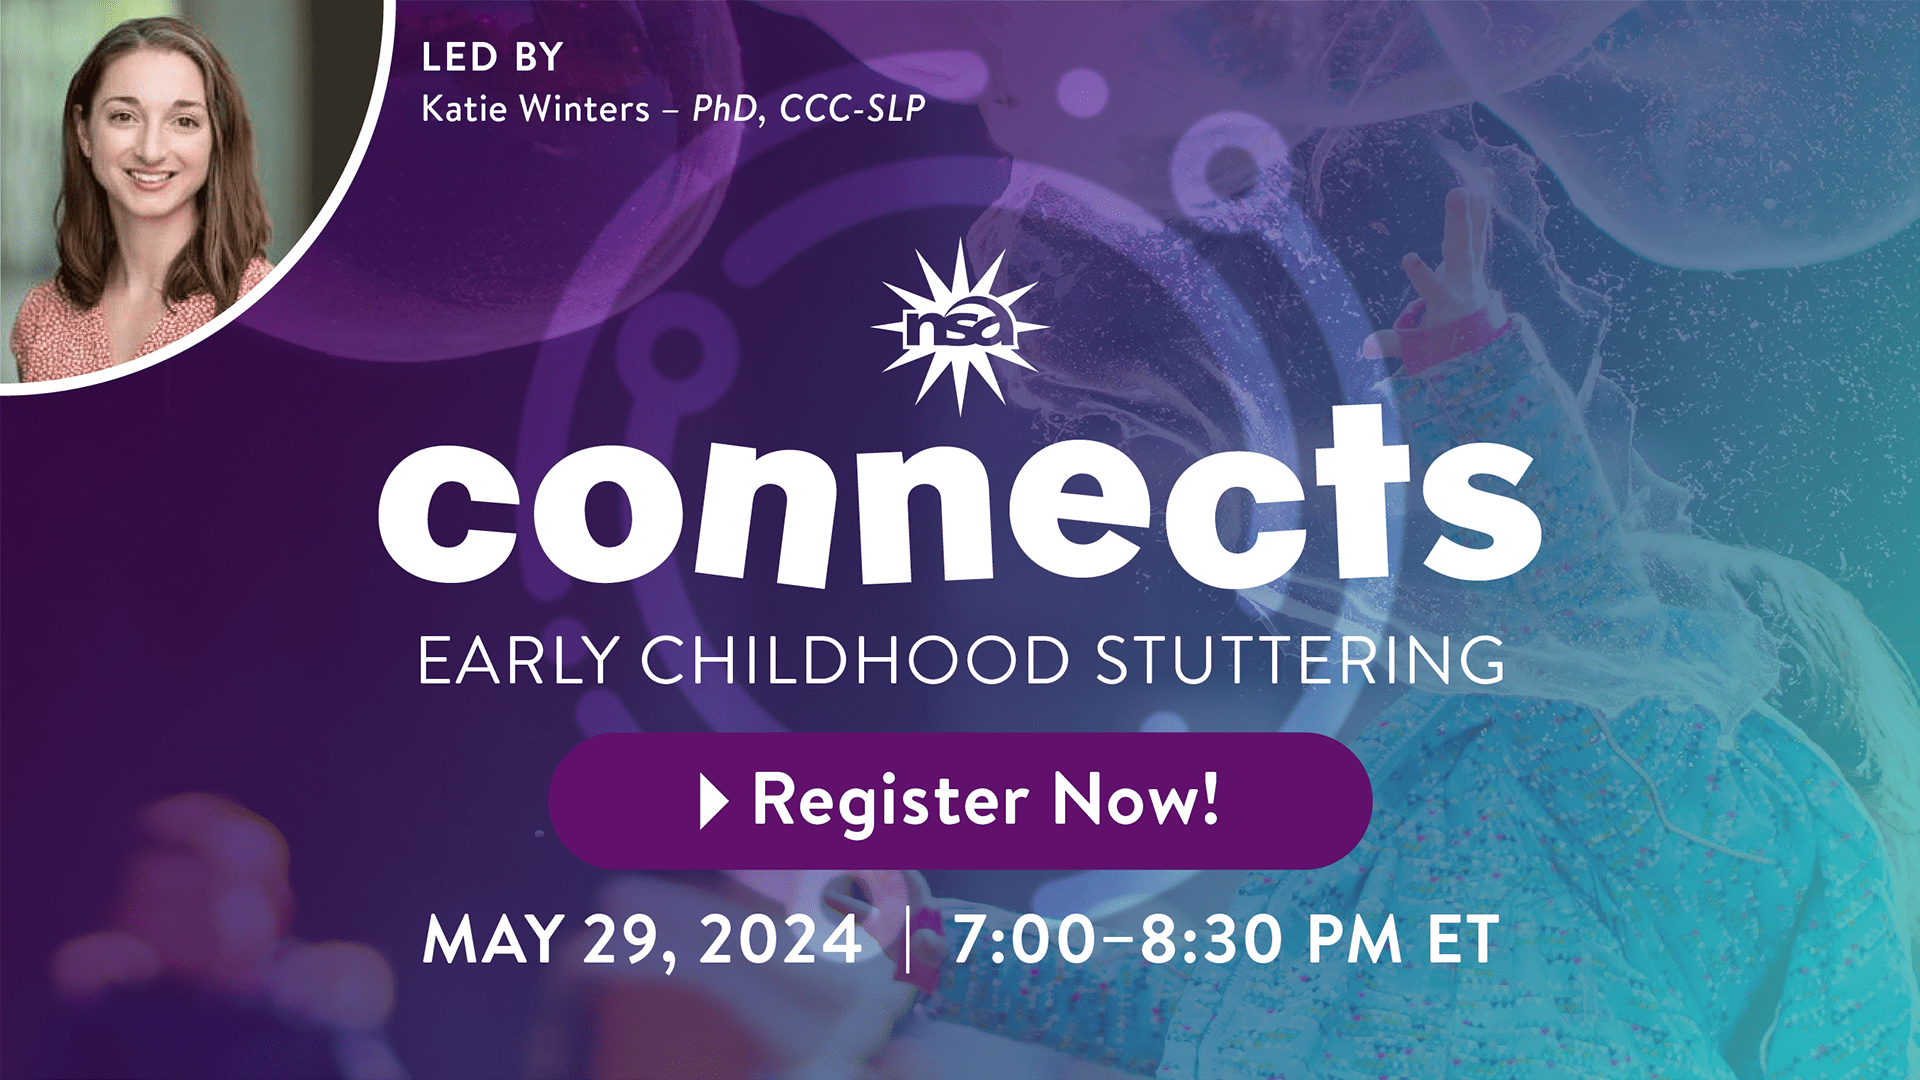 Promotional image for an event on Early Childhood Stuttering featuring speaker Katie Winters, PhD, CCC-SLP. Join us on May 29, 2024, from 7:00 to 8:30 PM ET. Don't miss out—click the prominent "Register Now!" button!